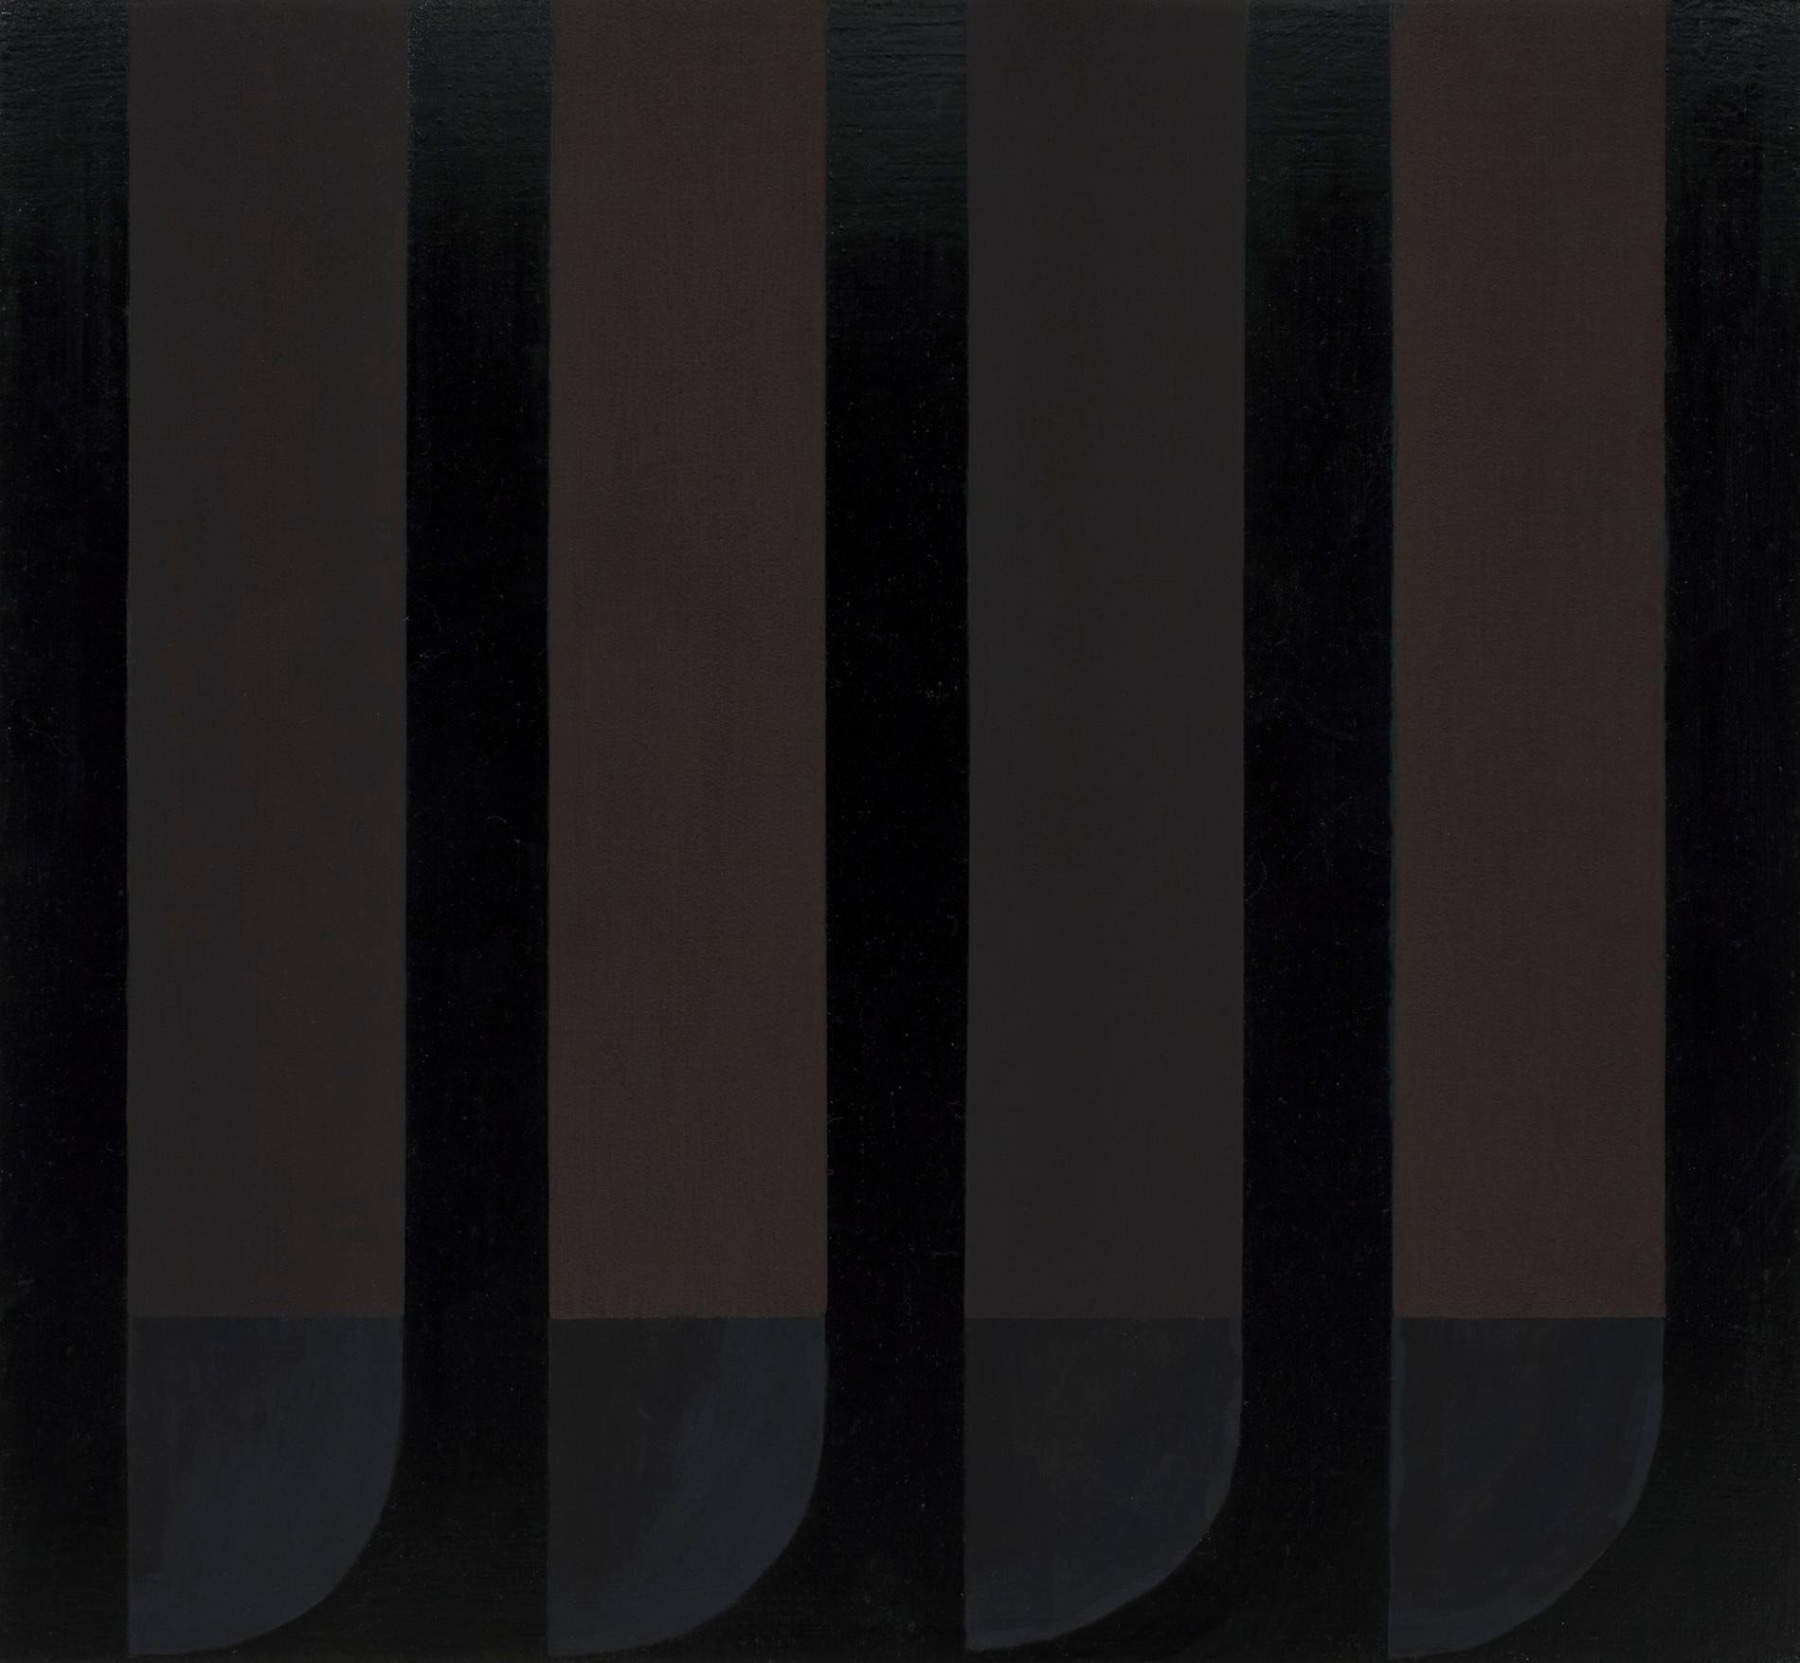 Abstract painting with five black vertical streaks evenly spread out on the panel